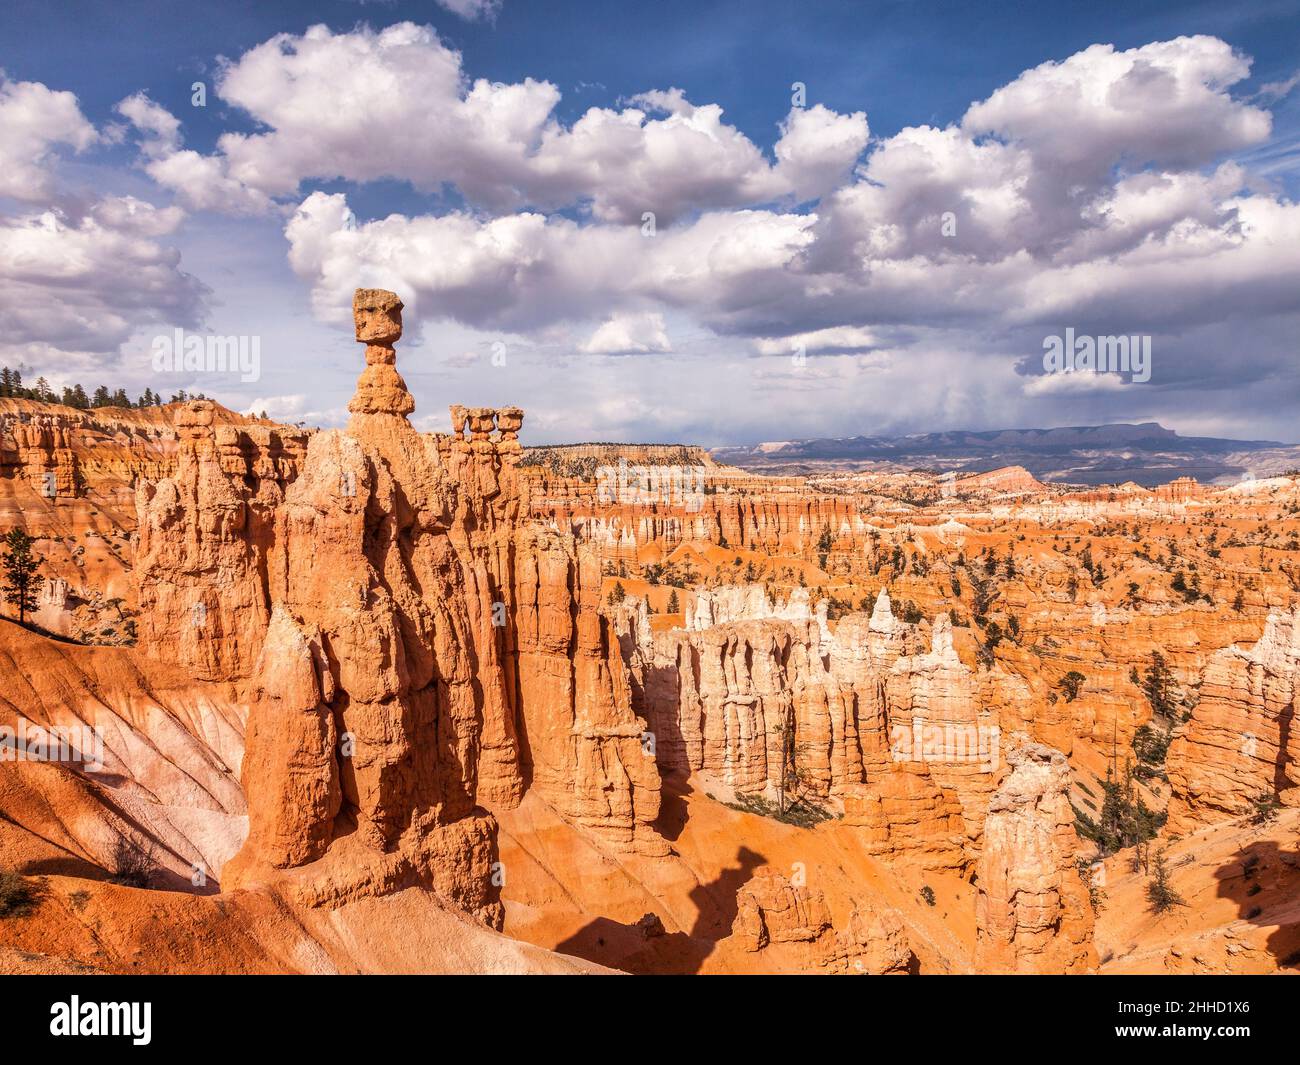 Thor's Hammer, the most famous of the thouisands of hoodoos in Bryce Canyon National Park, Utah. Stock Photo